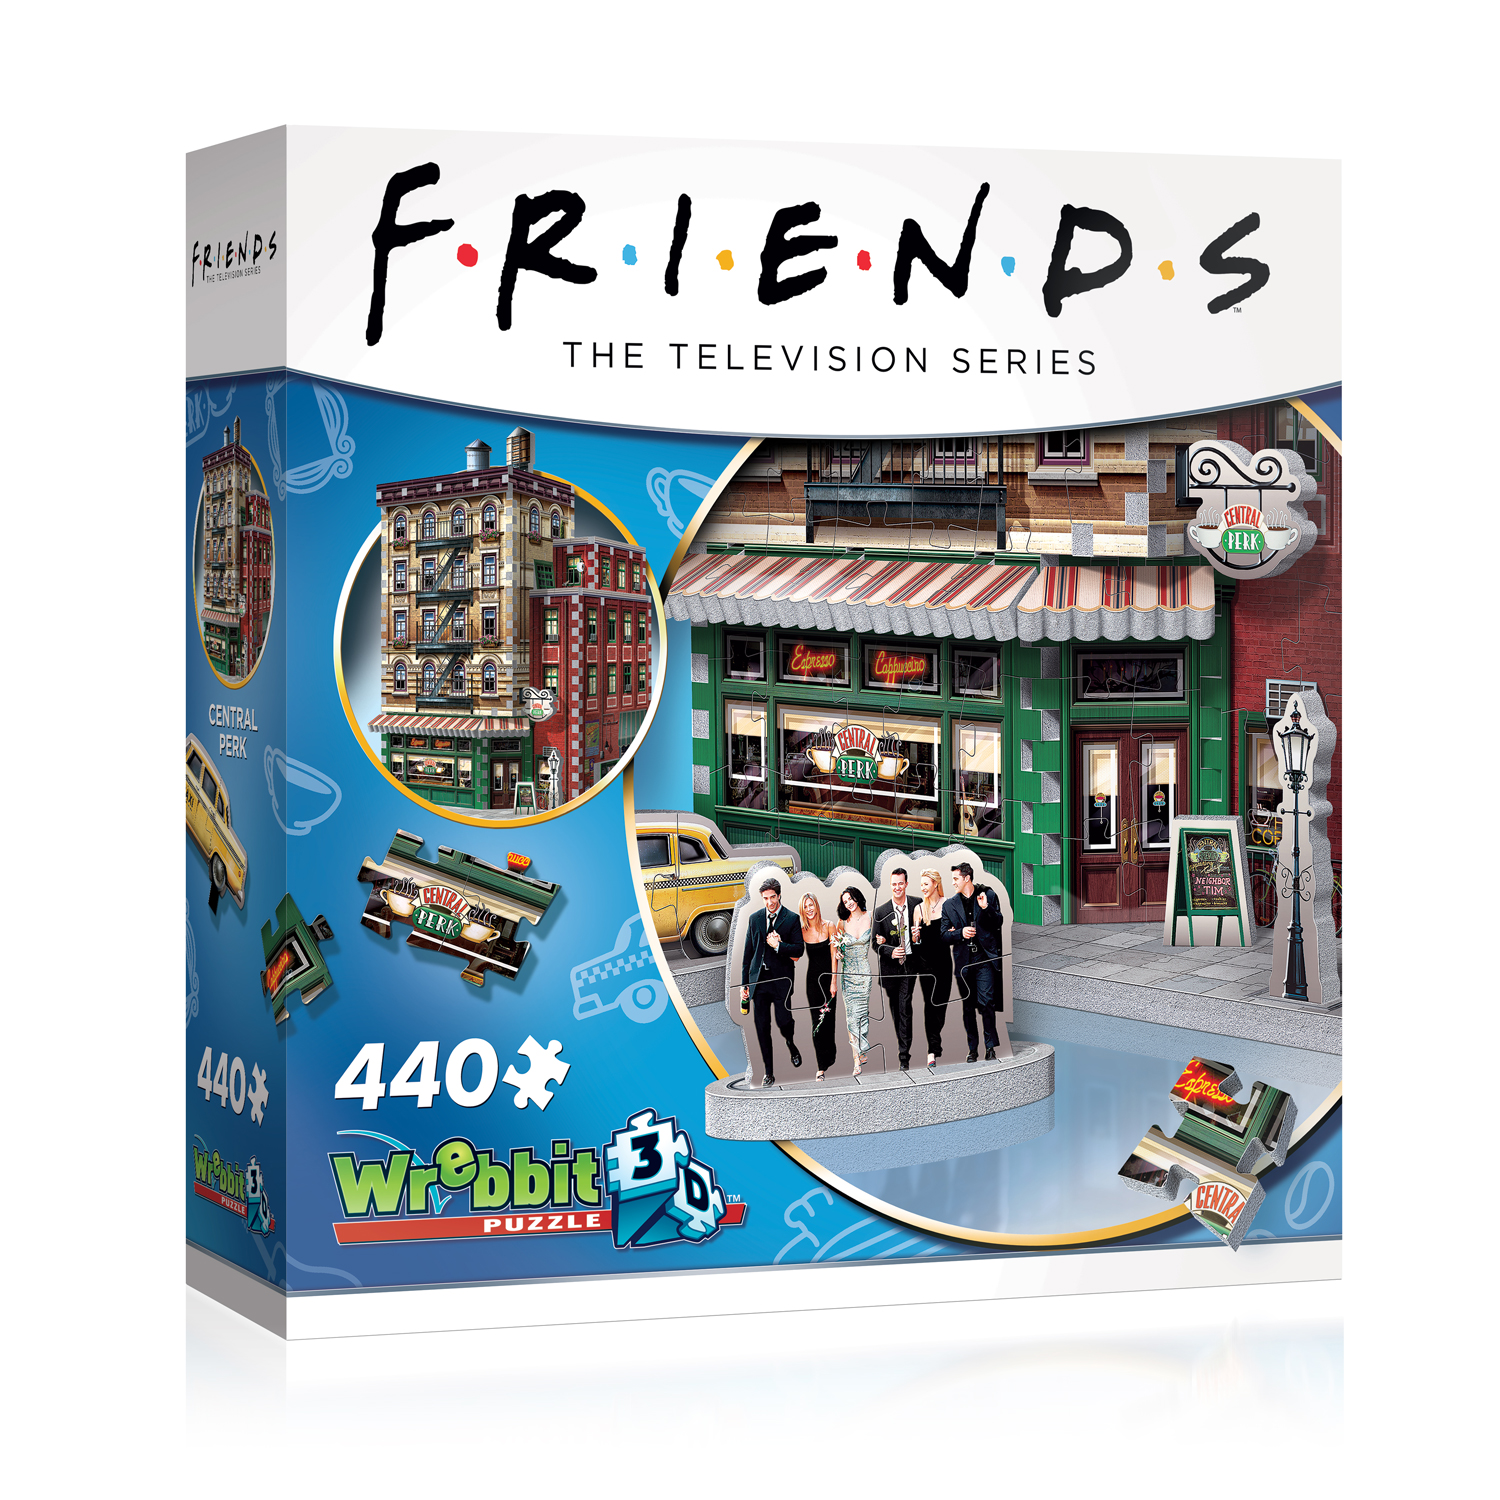 FRIENDS TV Series Jigsaw Puzzle Set of 2 300 Pieces New